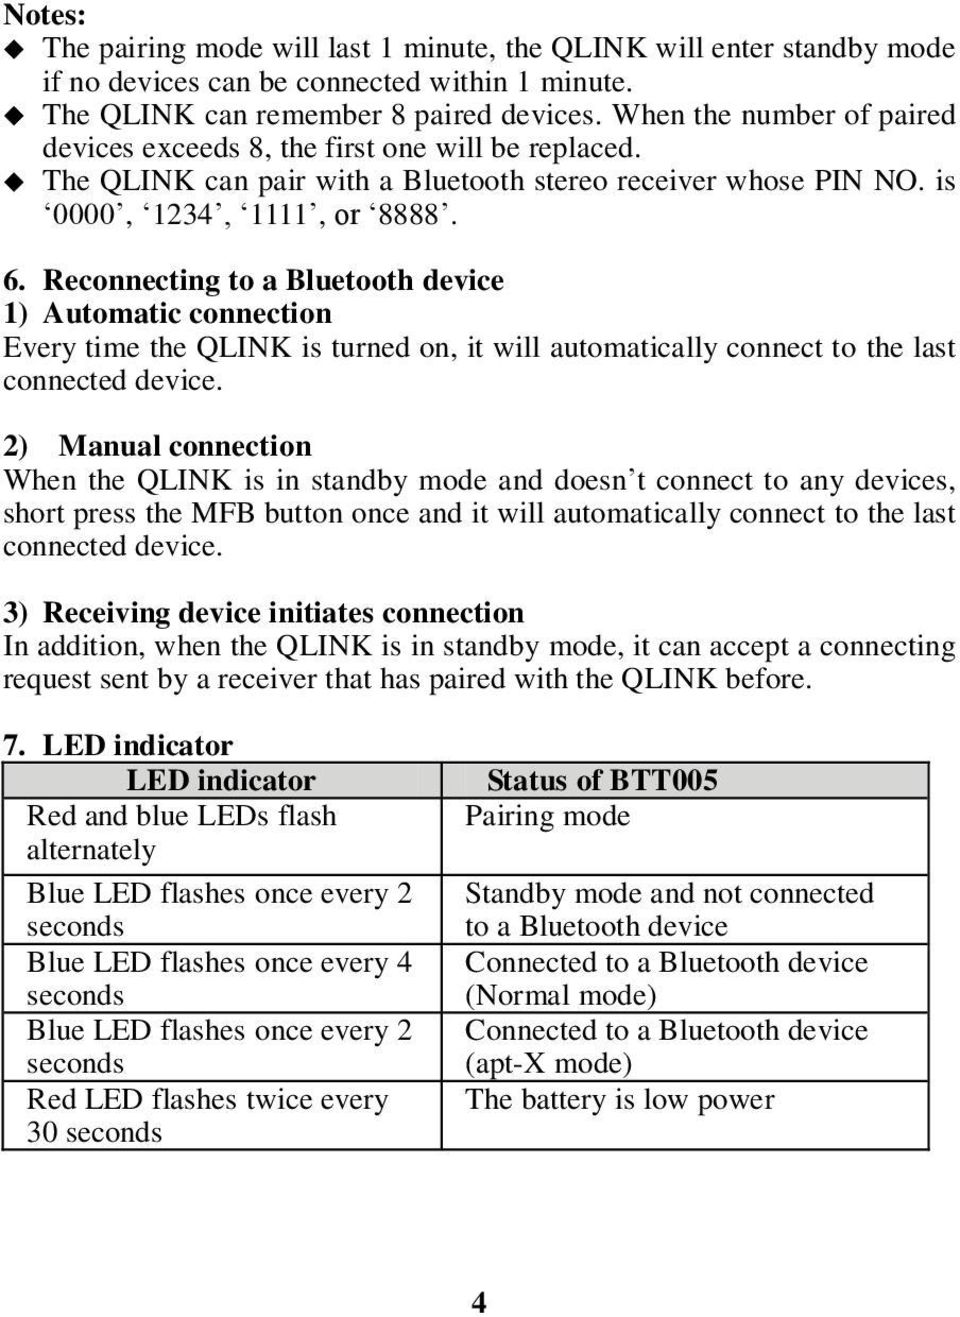 Reconnecting to a Bluetooth device 1) Automatic connection Every time the QLINK is turned on, it will automatically connect to the last connected device.